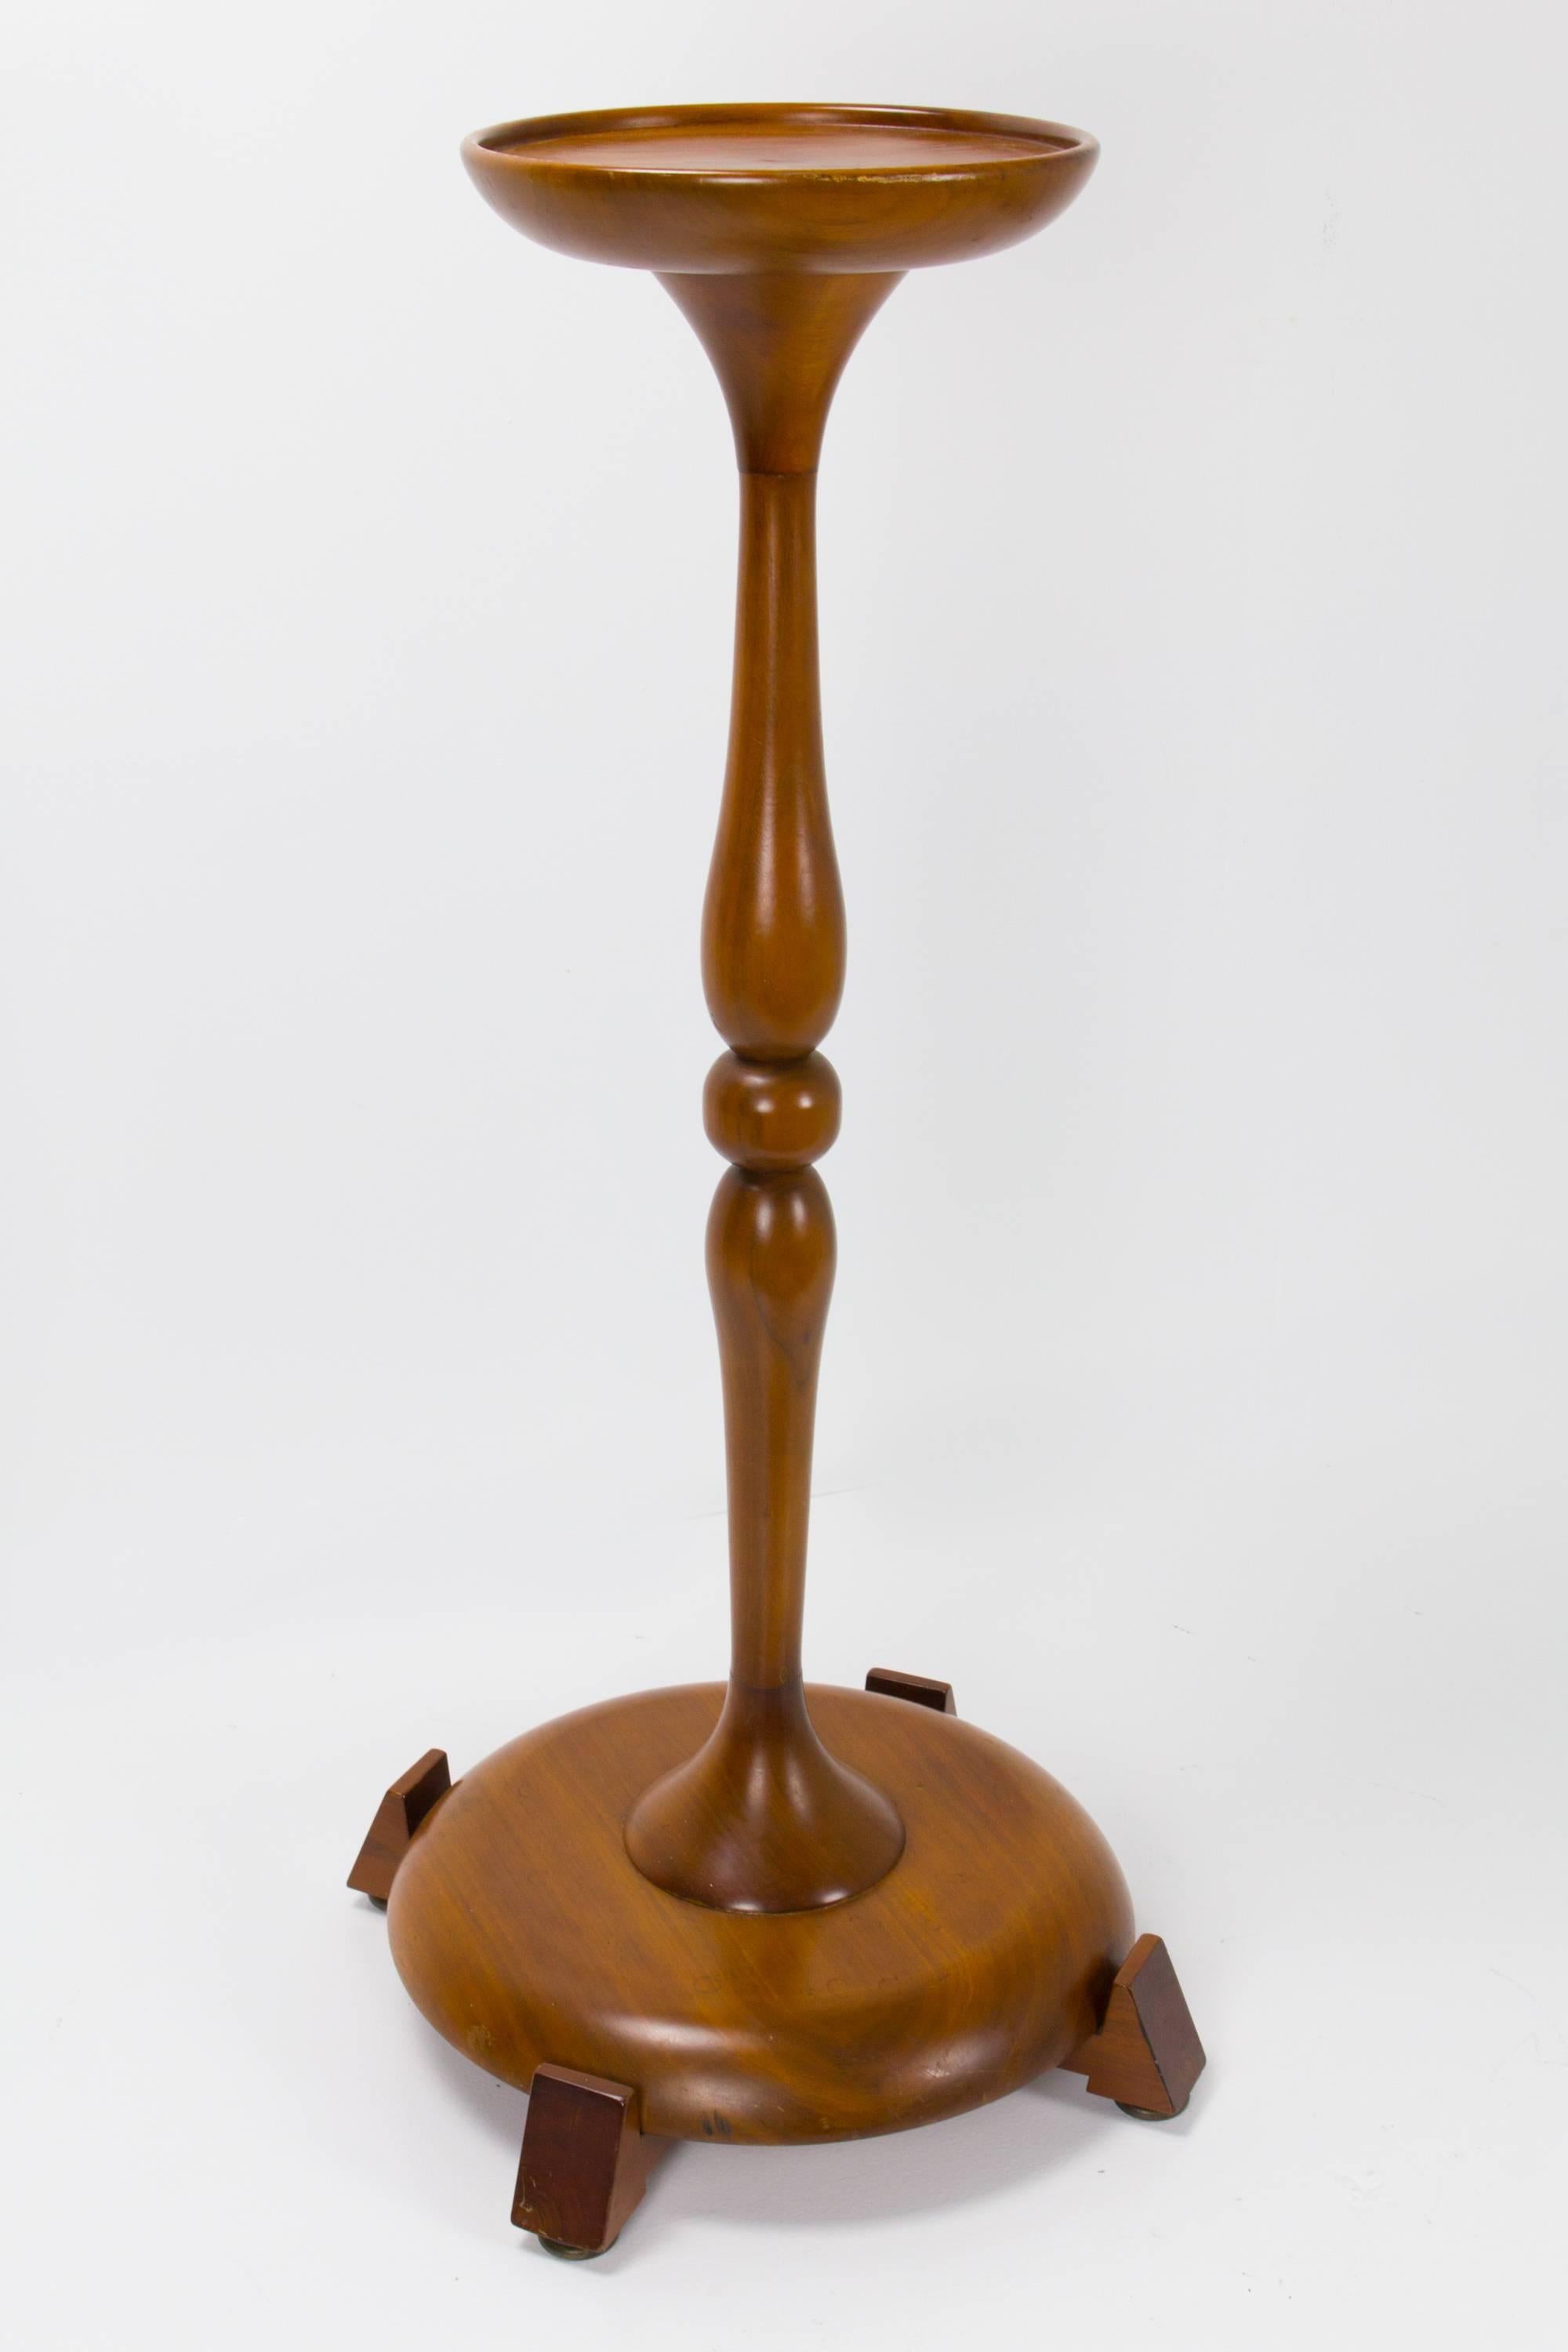 American Studio craft movement pedestal in walnut by Robert Whitley with fine carved and turned detail. Incised signature to base. The diameter of the pedestal is 10.5 inches.